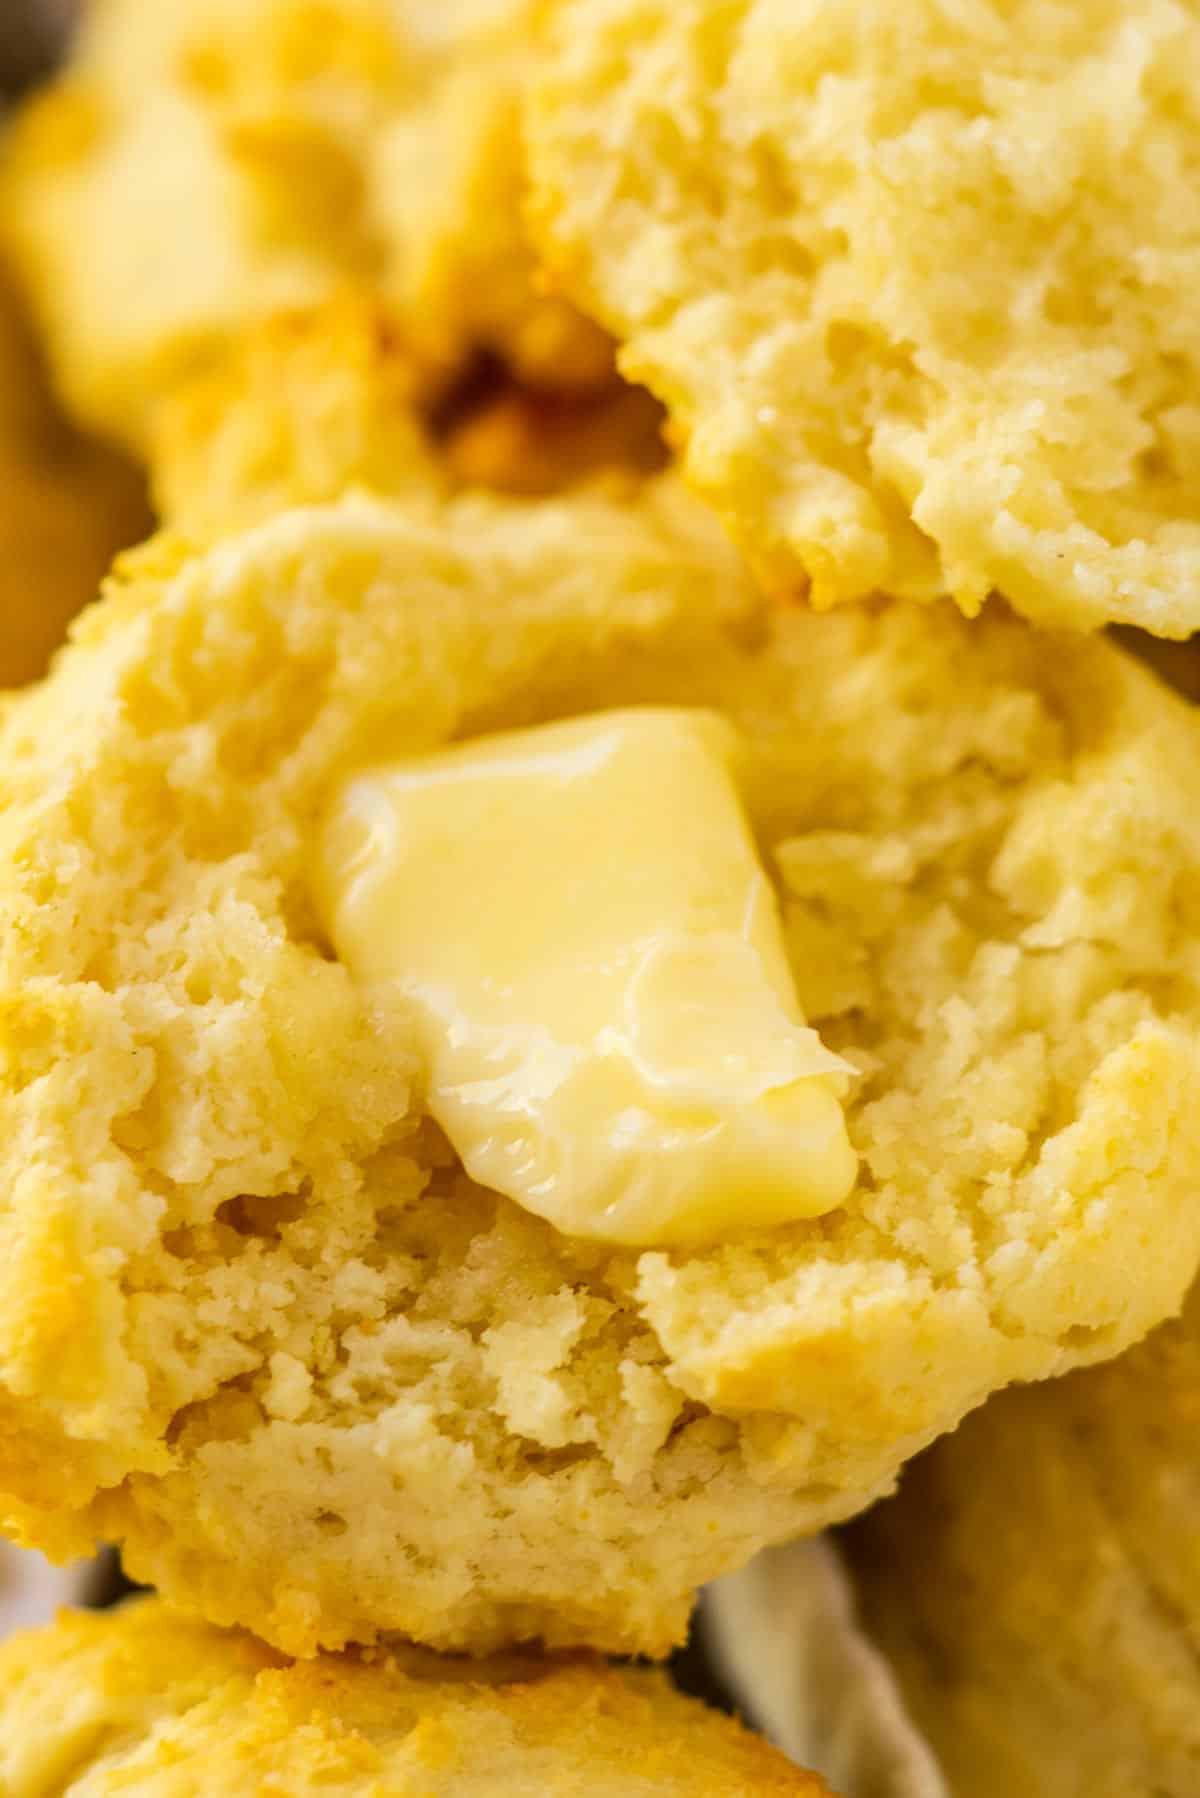 A split biscuit with a pat of butter on it